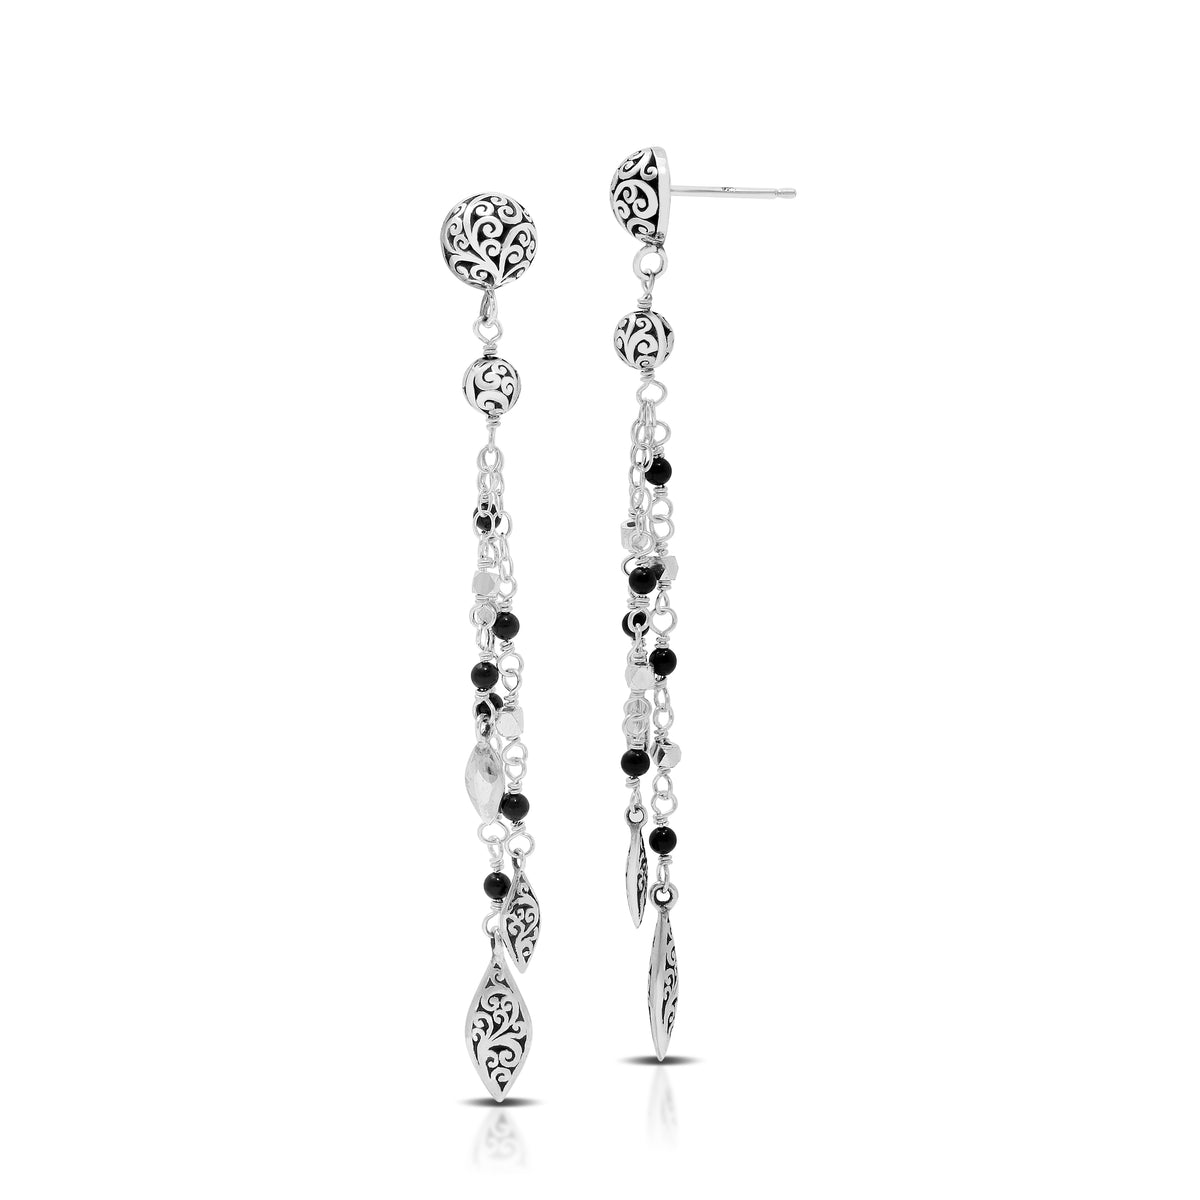 LH Scroll Marquise Charm with Black Onyx Wire-Wrapped Post Earrings